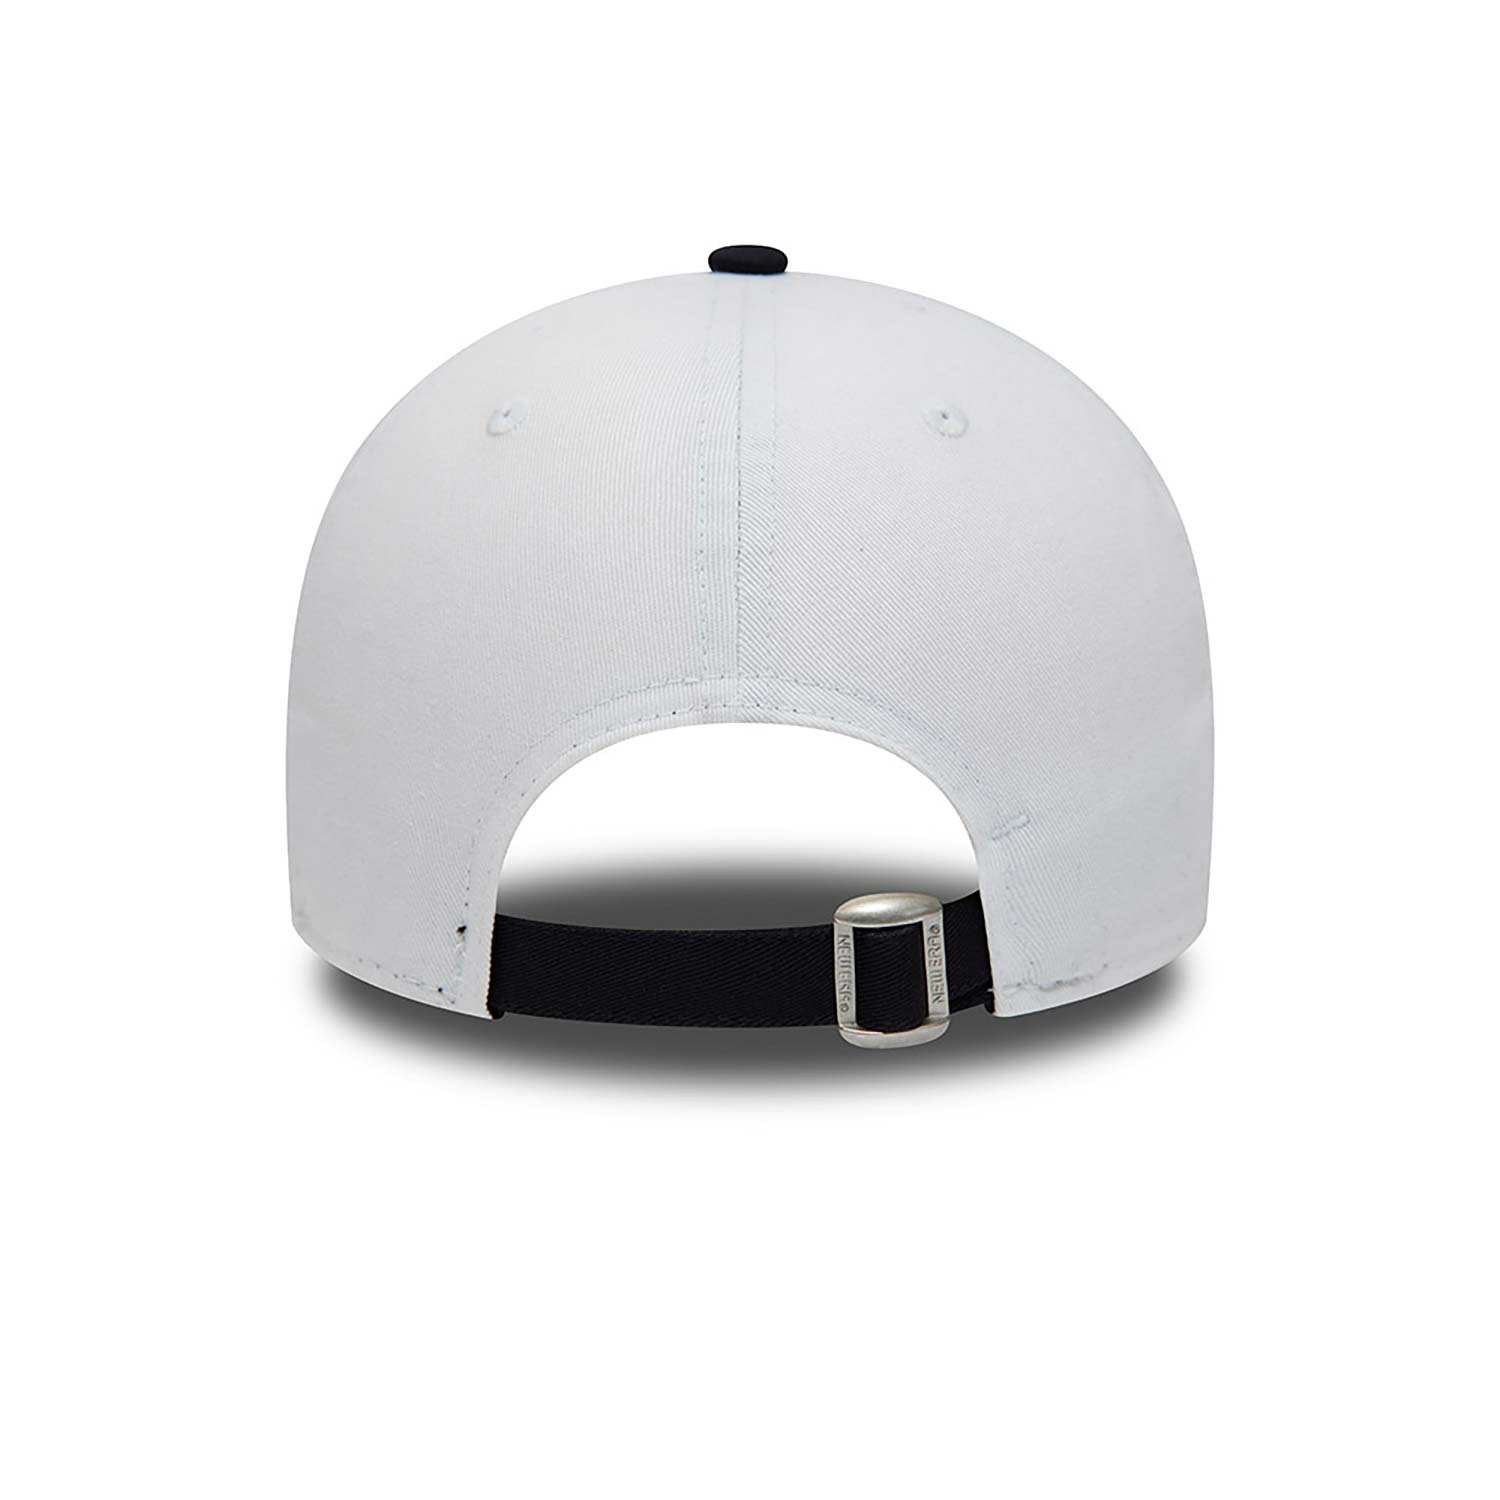 French Federation Of Rugby Two Tone White 9FORTY Adjustable Cap